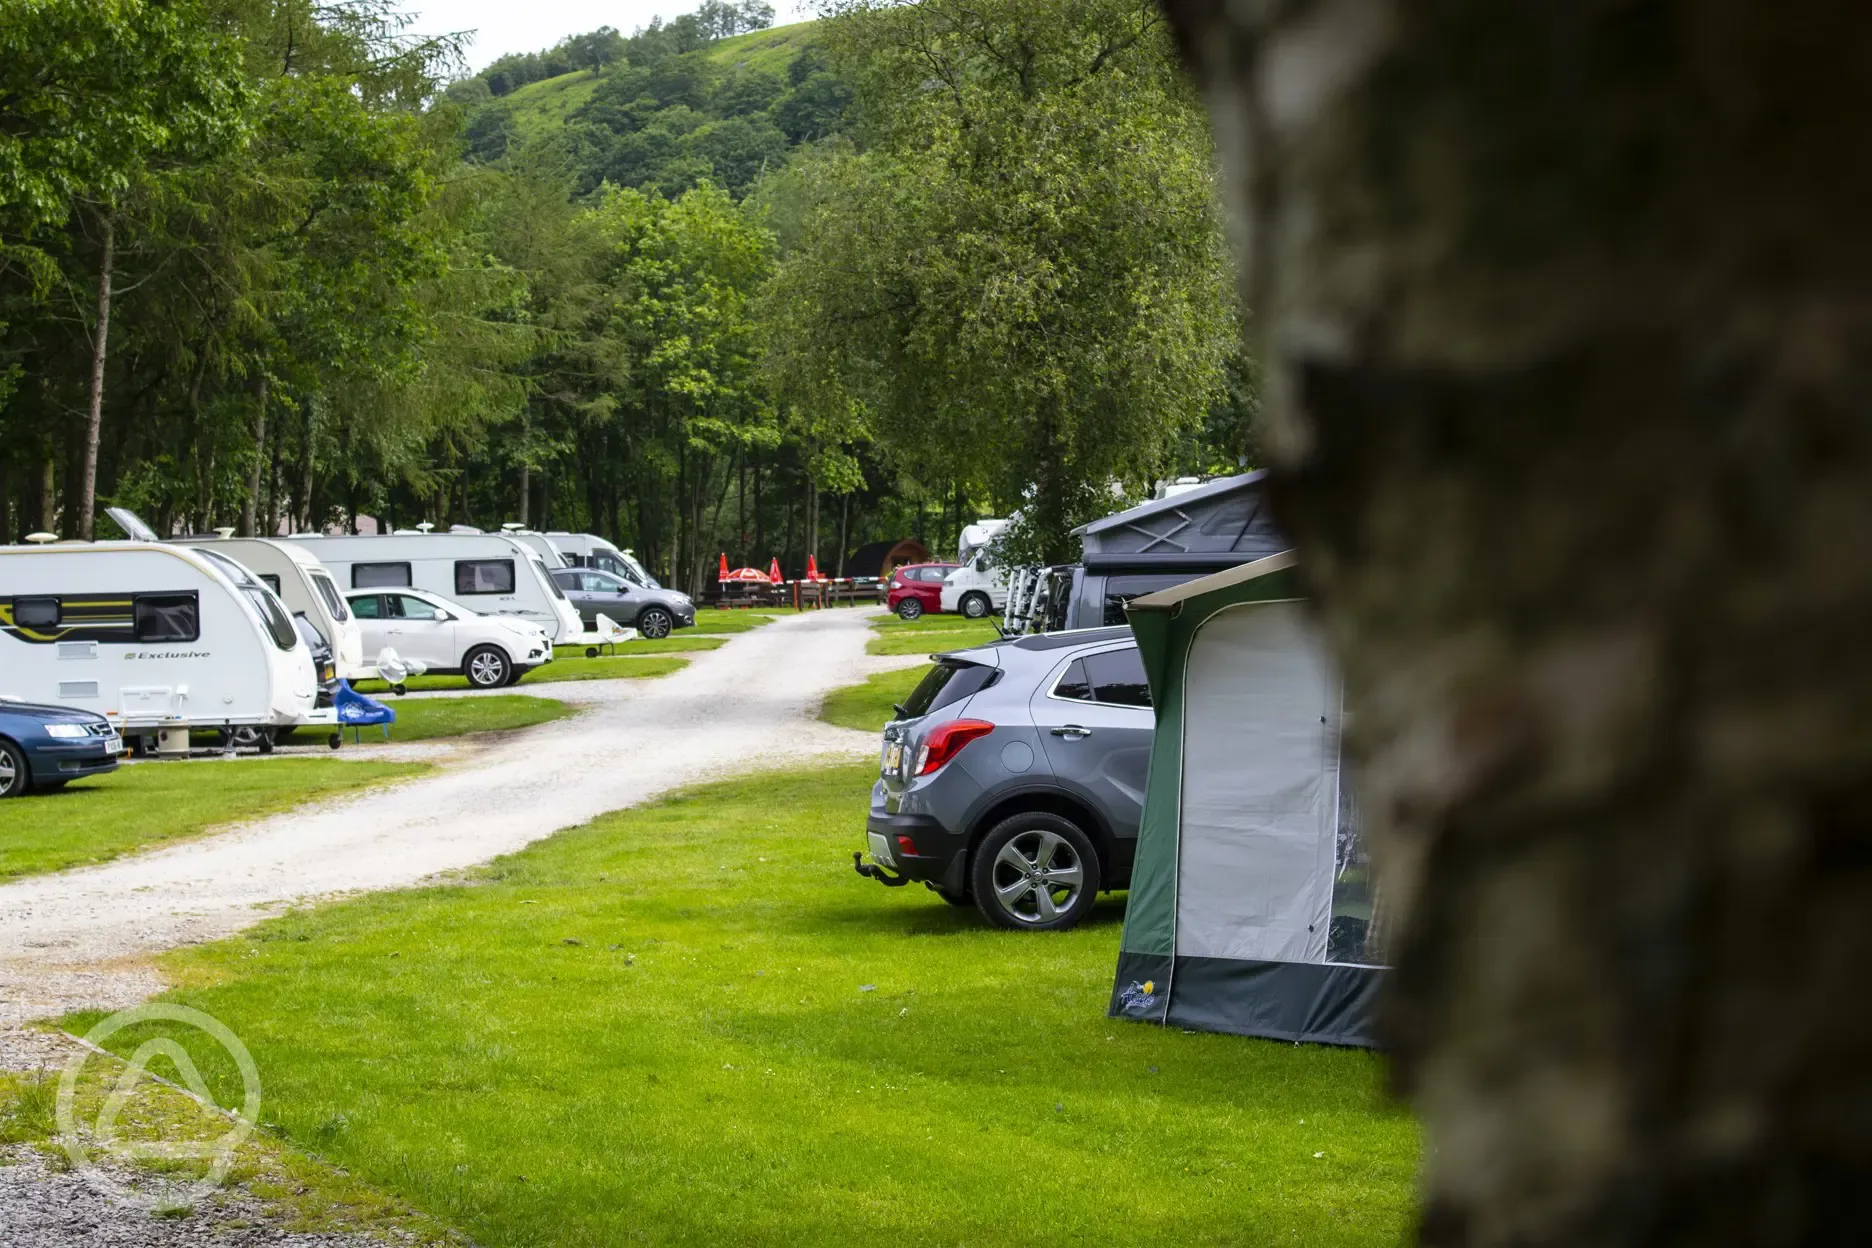 Crowden Camping and Caravanning